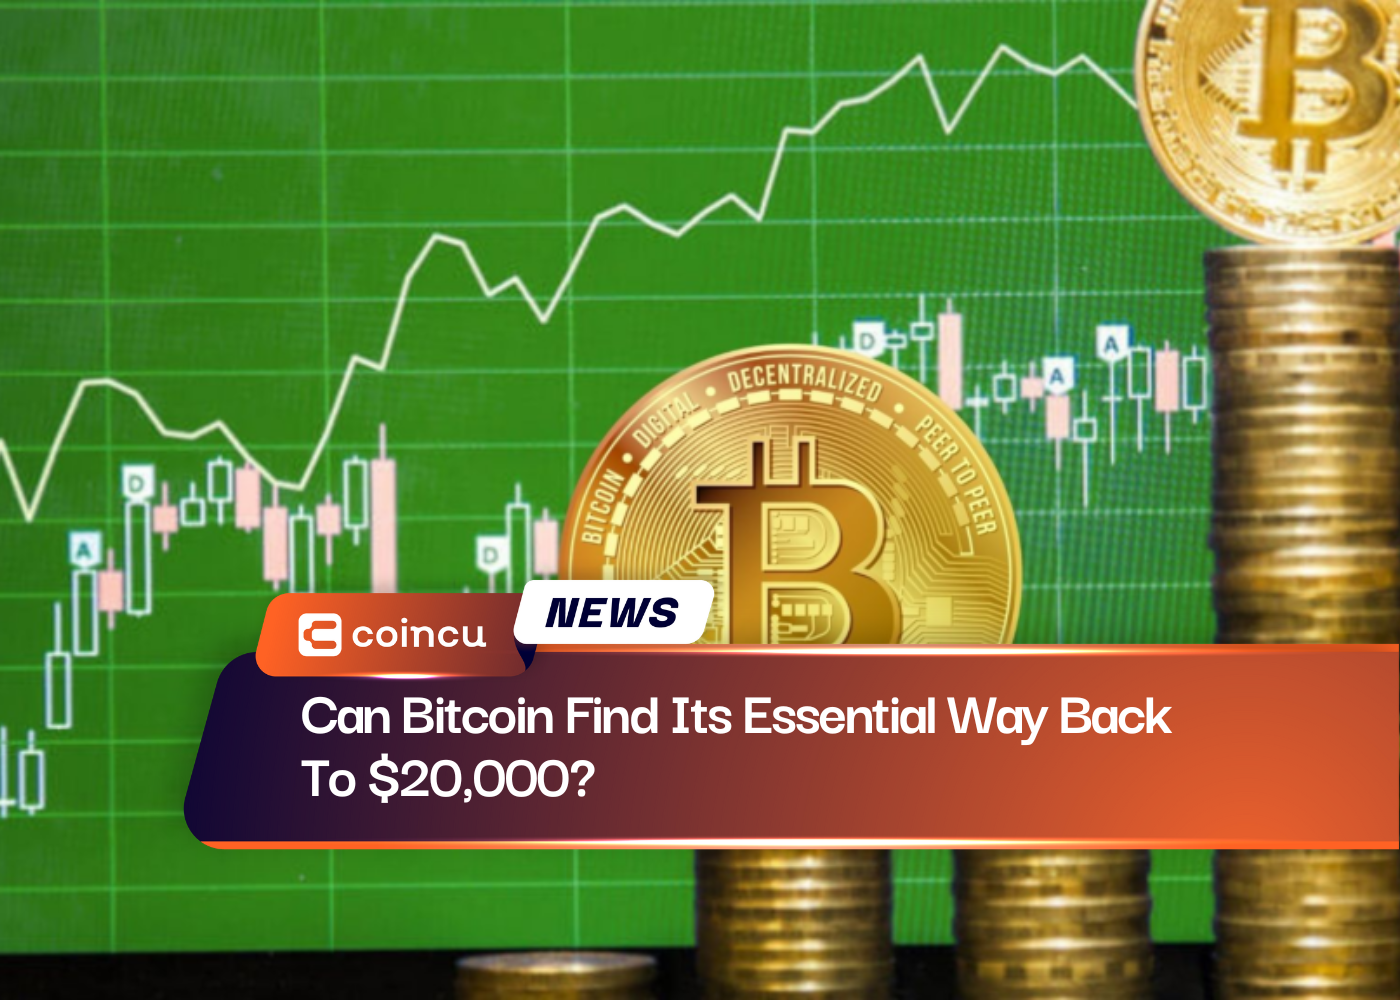 Can Bitcoin Find Its Essential Way Back To $20,000?